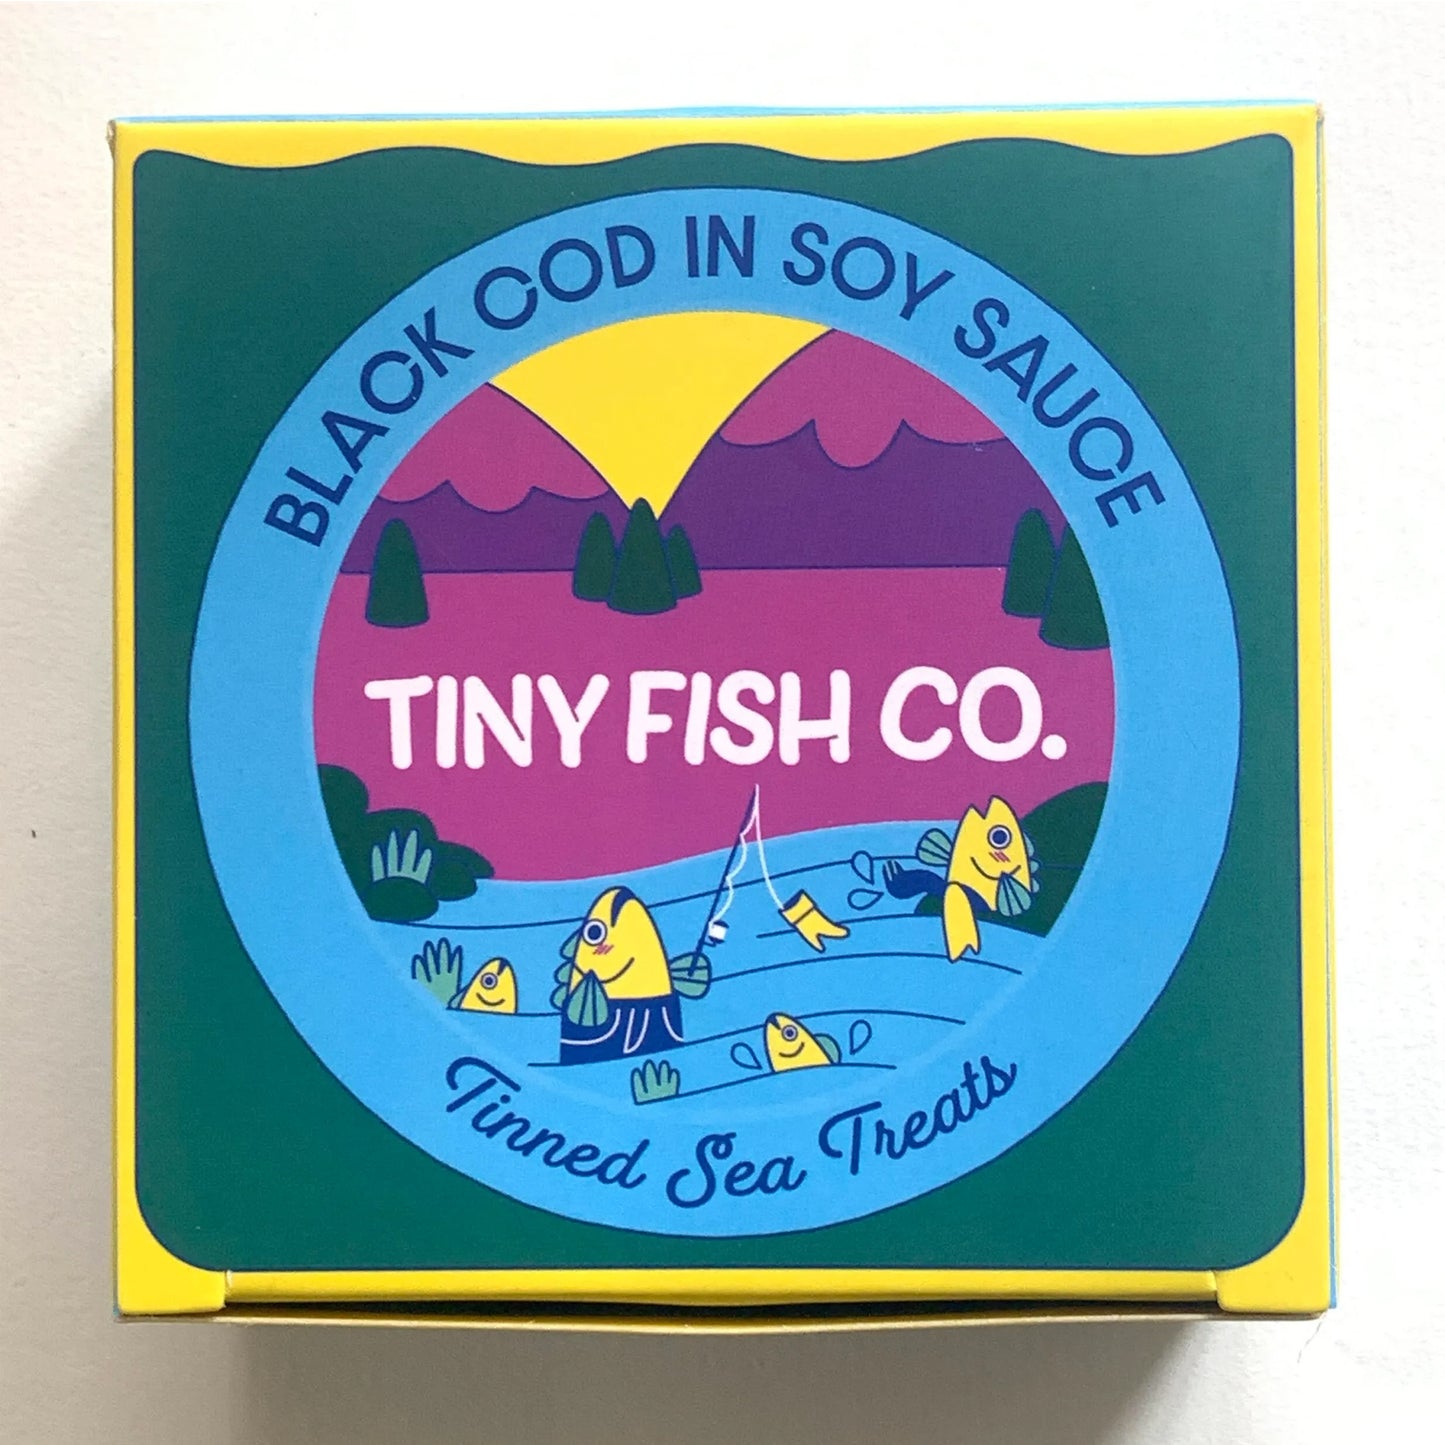 Tiny Fish Co. Black Cod in Soy